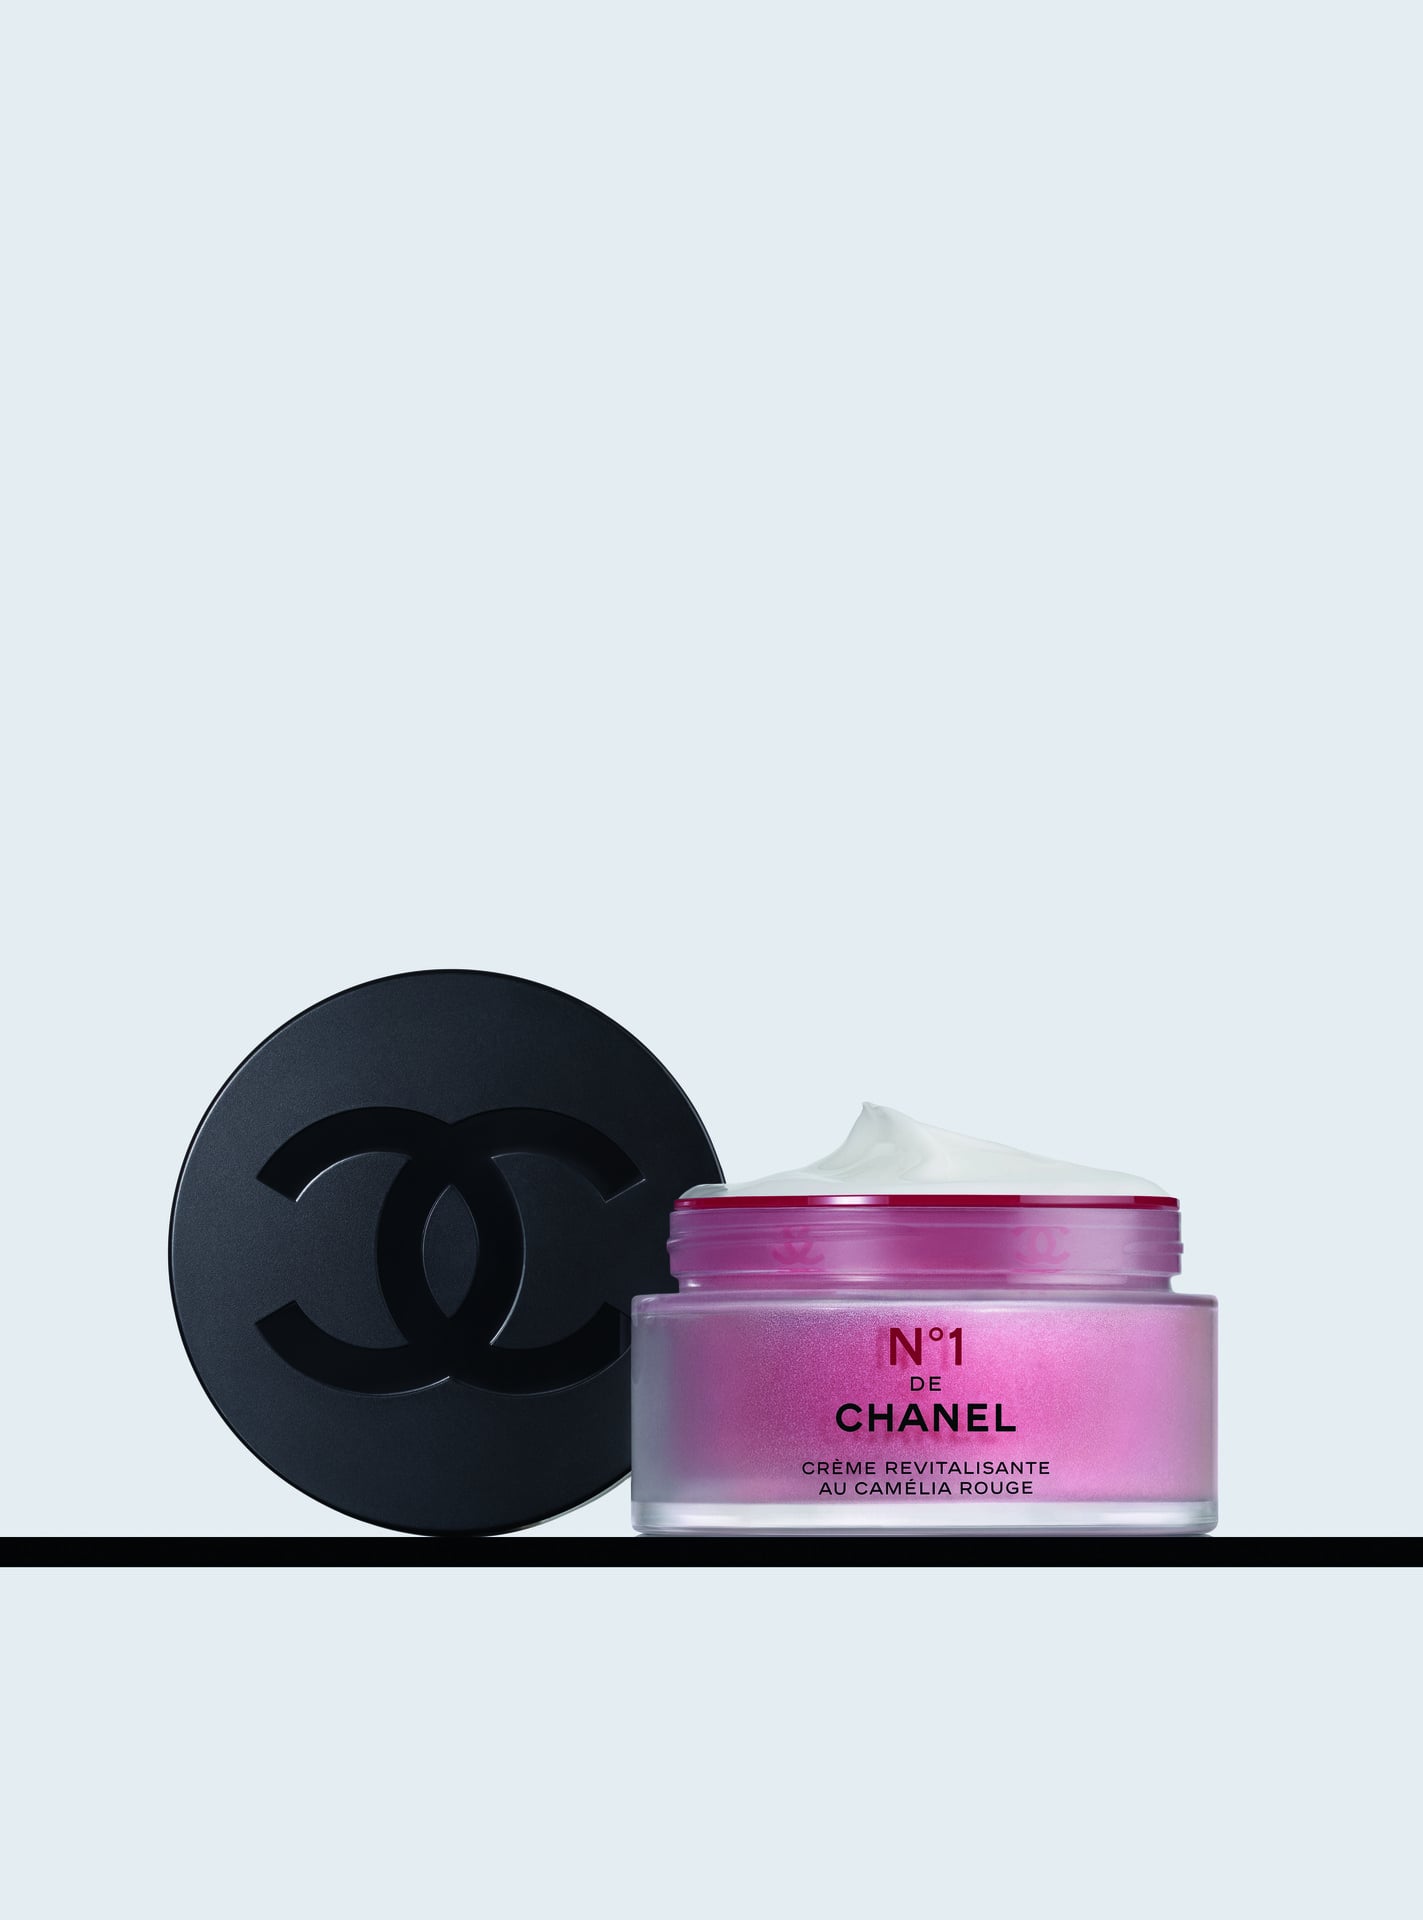 Chanel launches clean beauty line ahead of Lunar New Year - Global